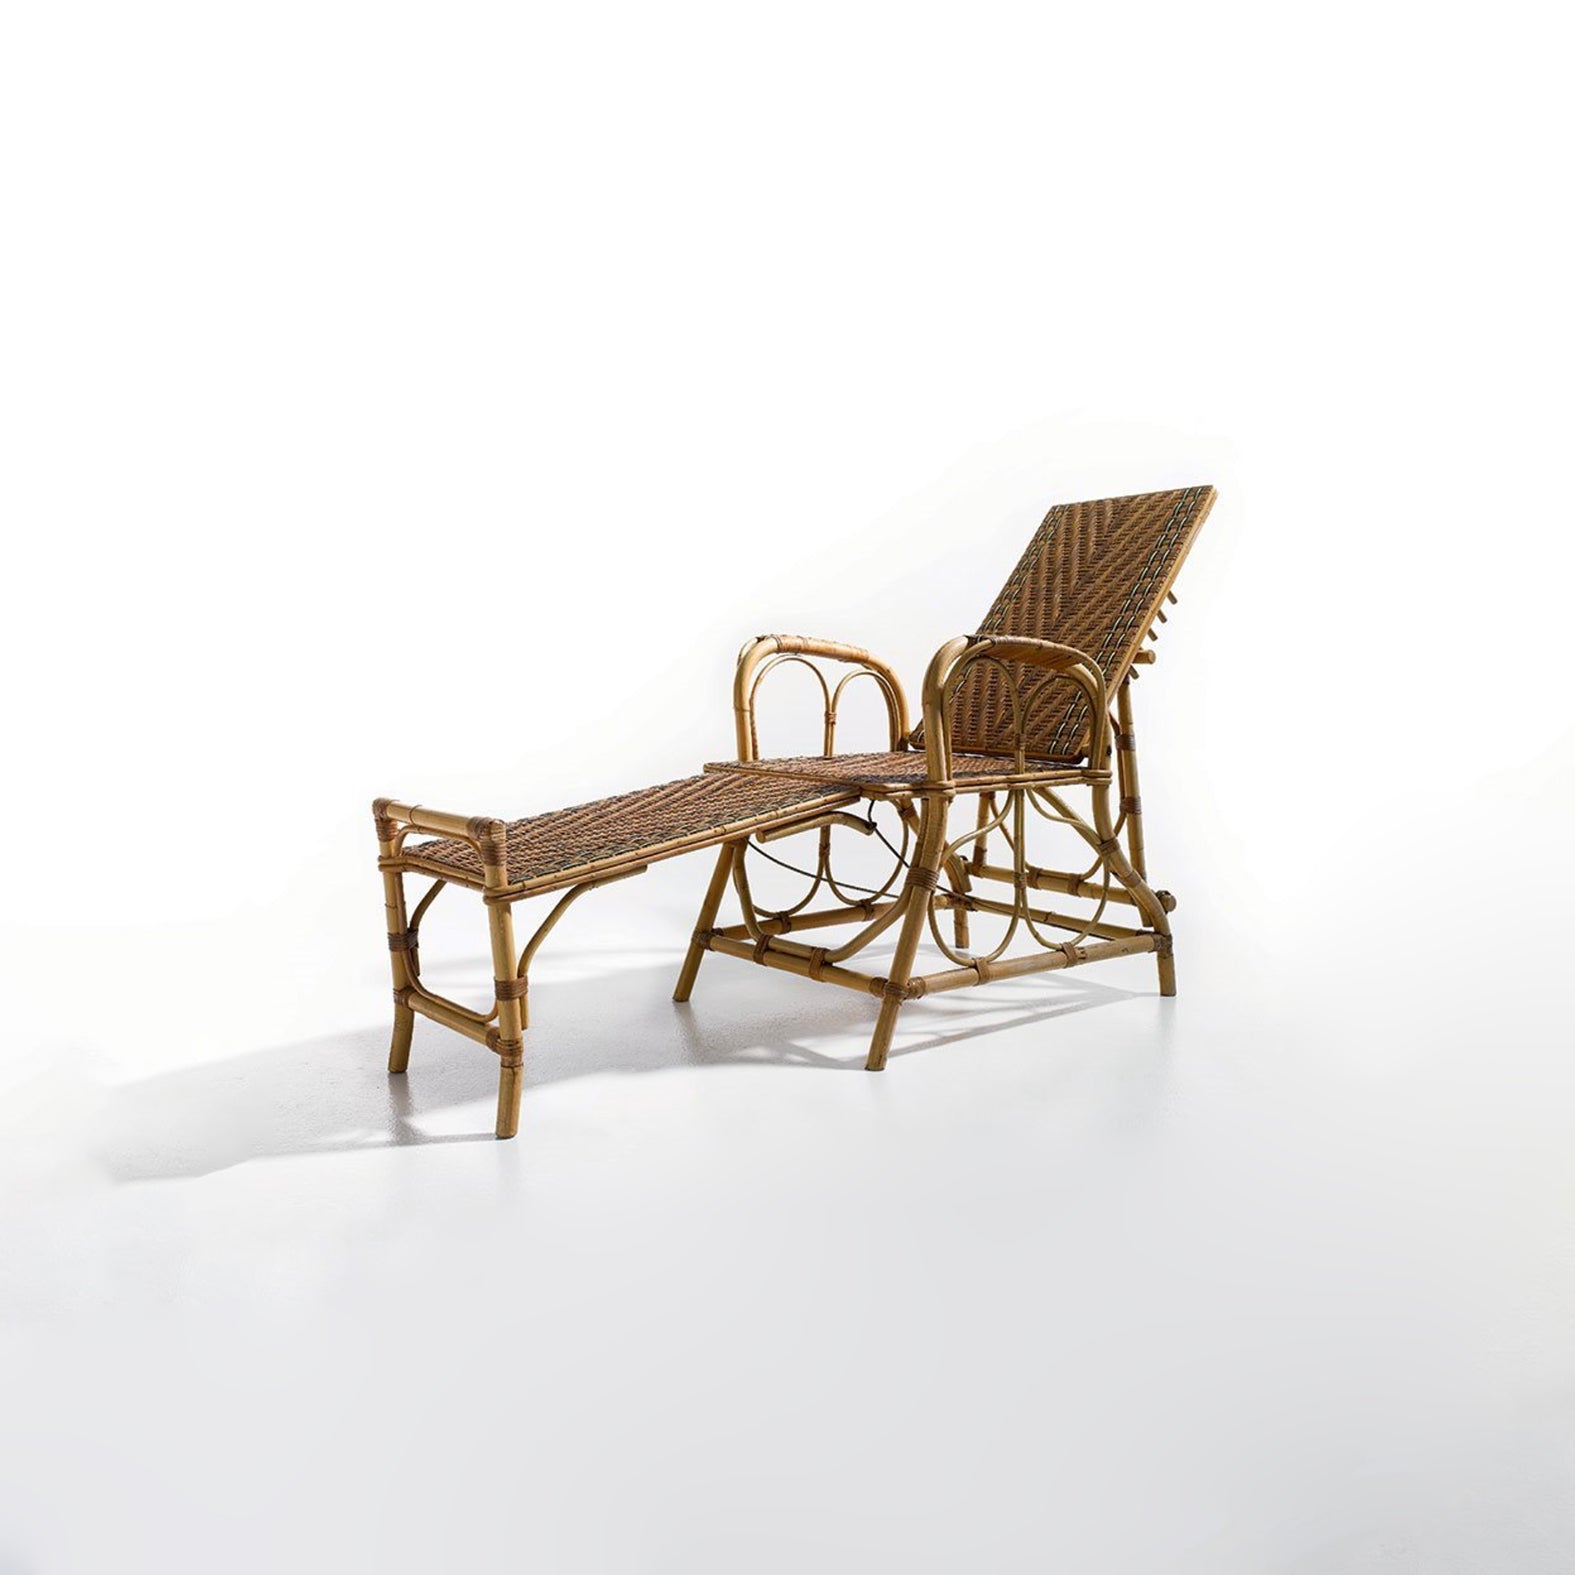 These two chaises longues are a direct legacy of Giovanni Bonacina and are testimony of how a well proportioned and well manufactured object can remain timeless.